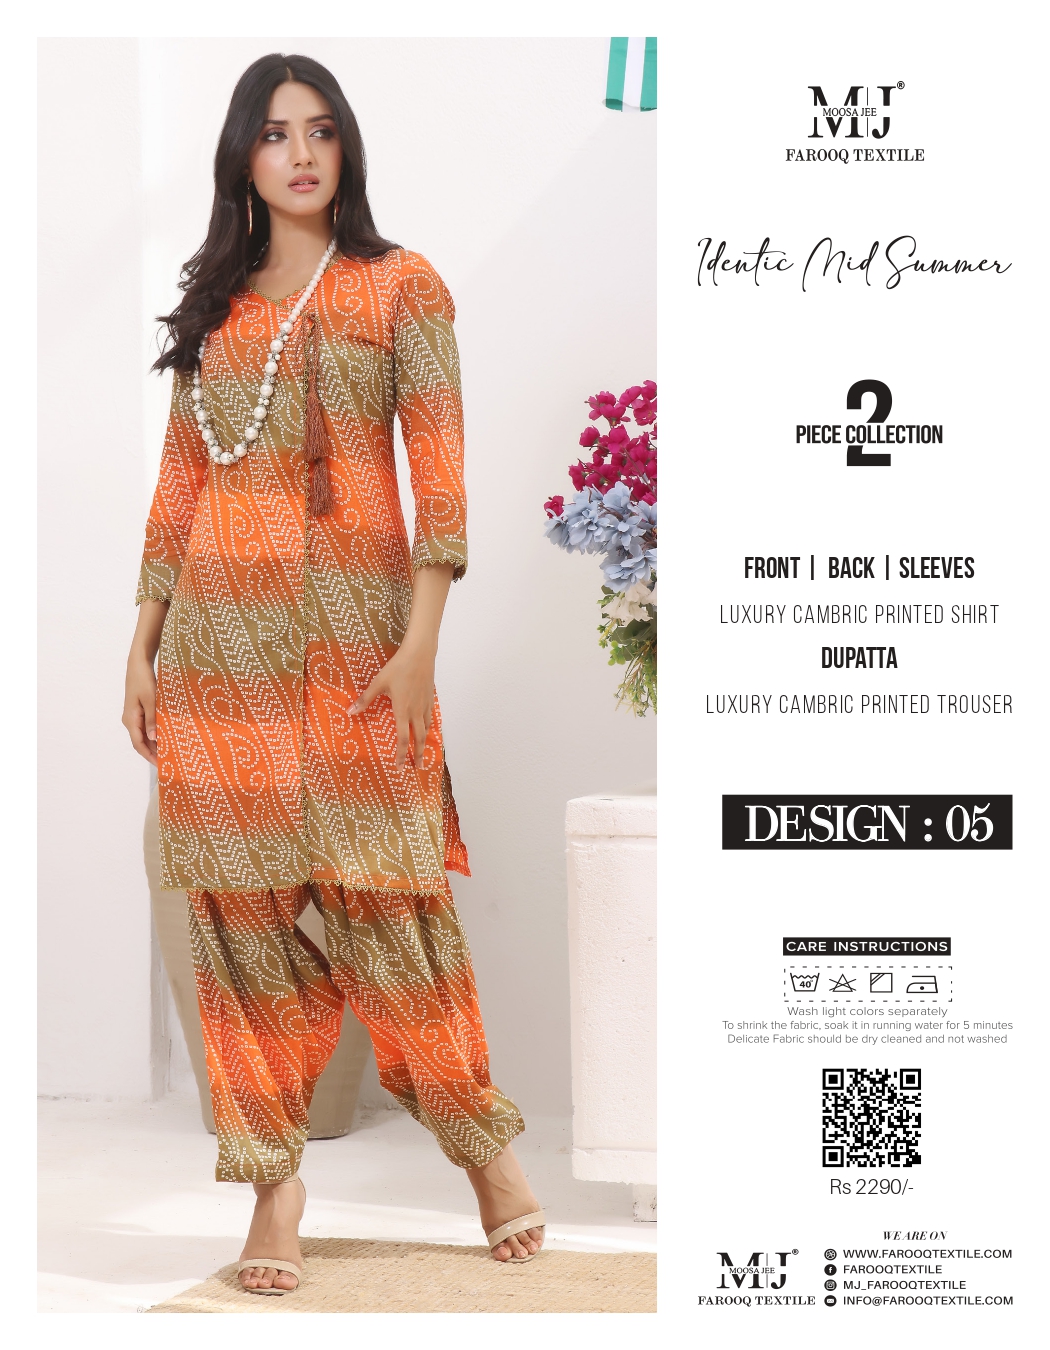 MJ 2pc Inlys by Farooq textile_page-0005